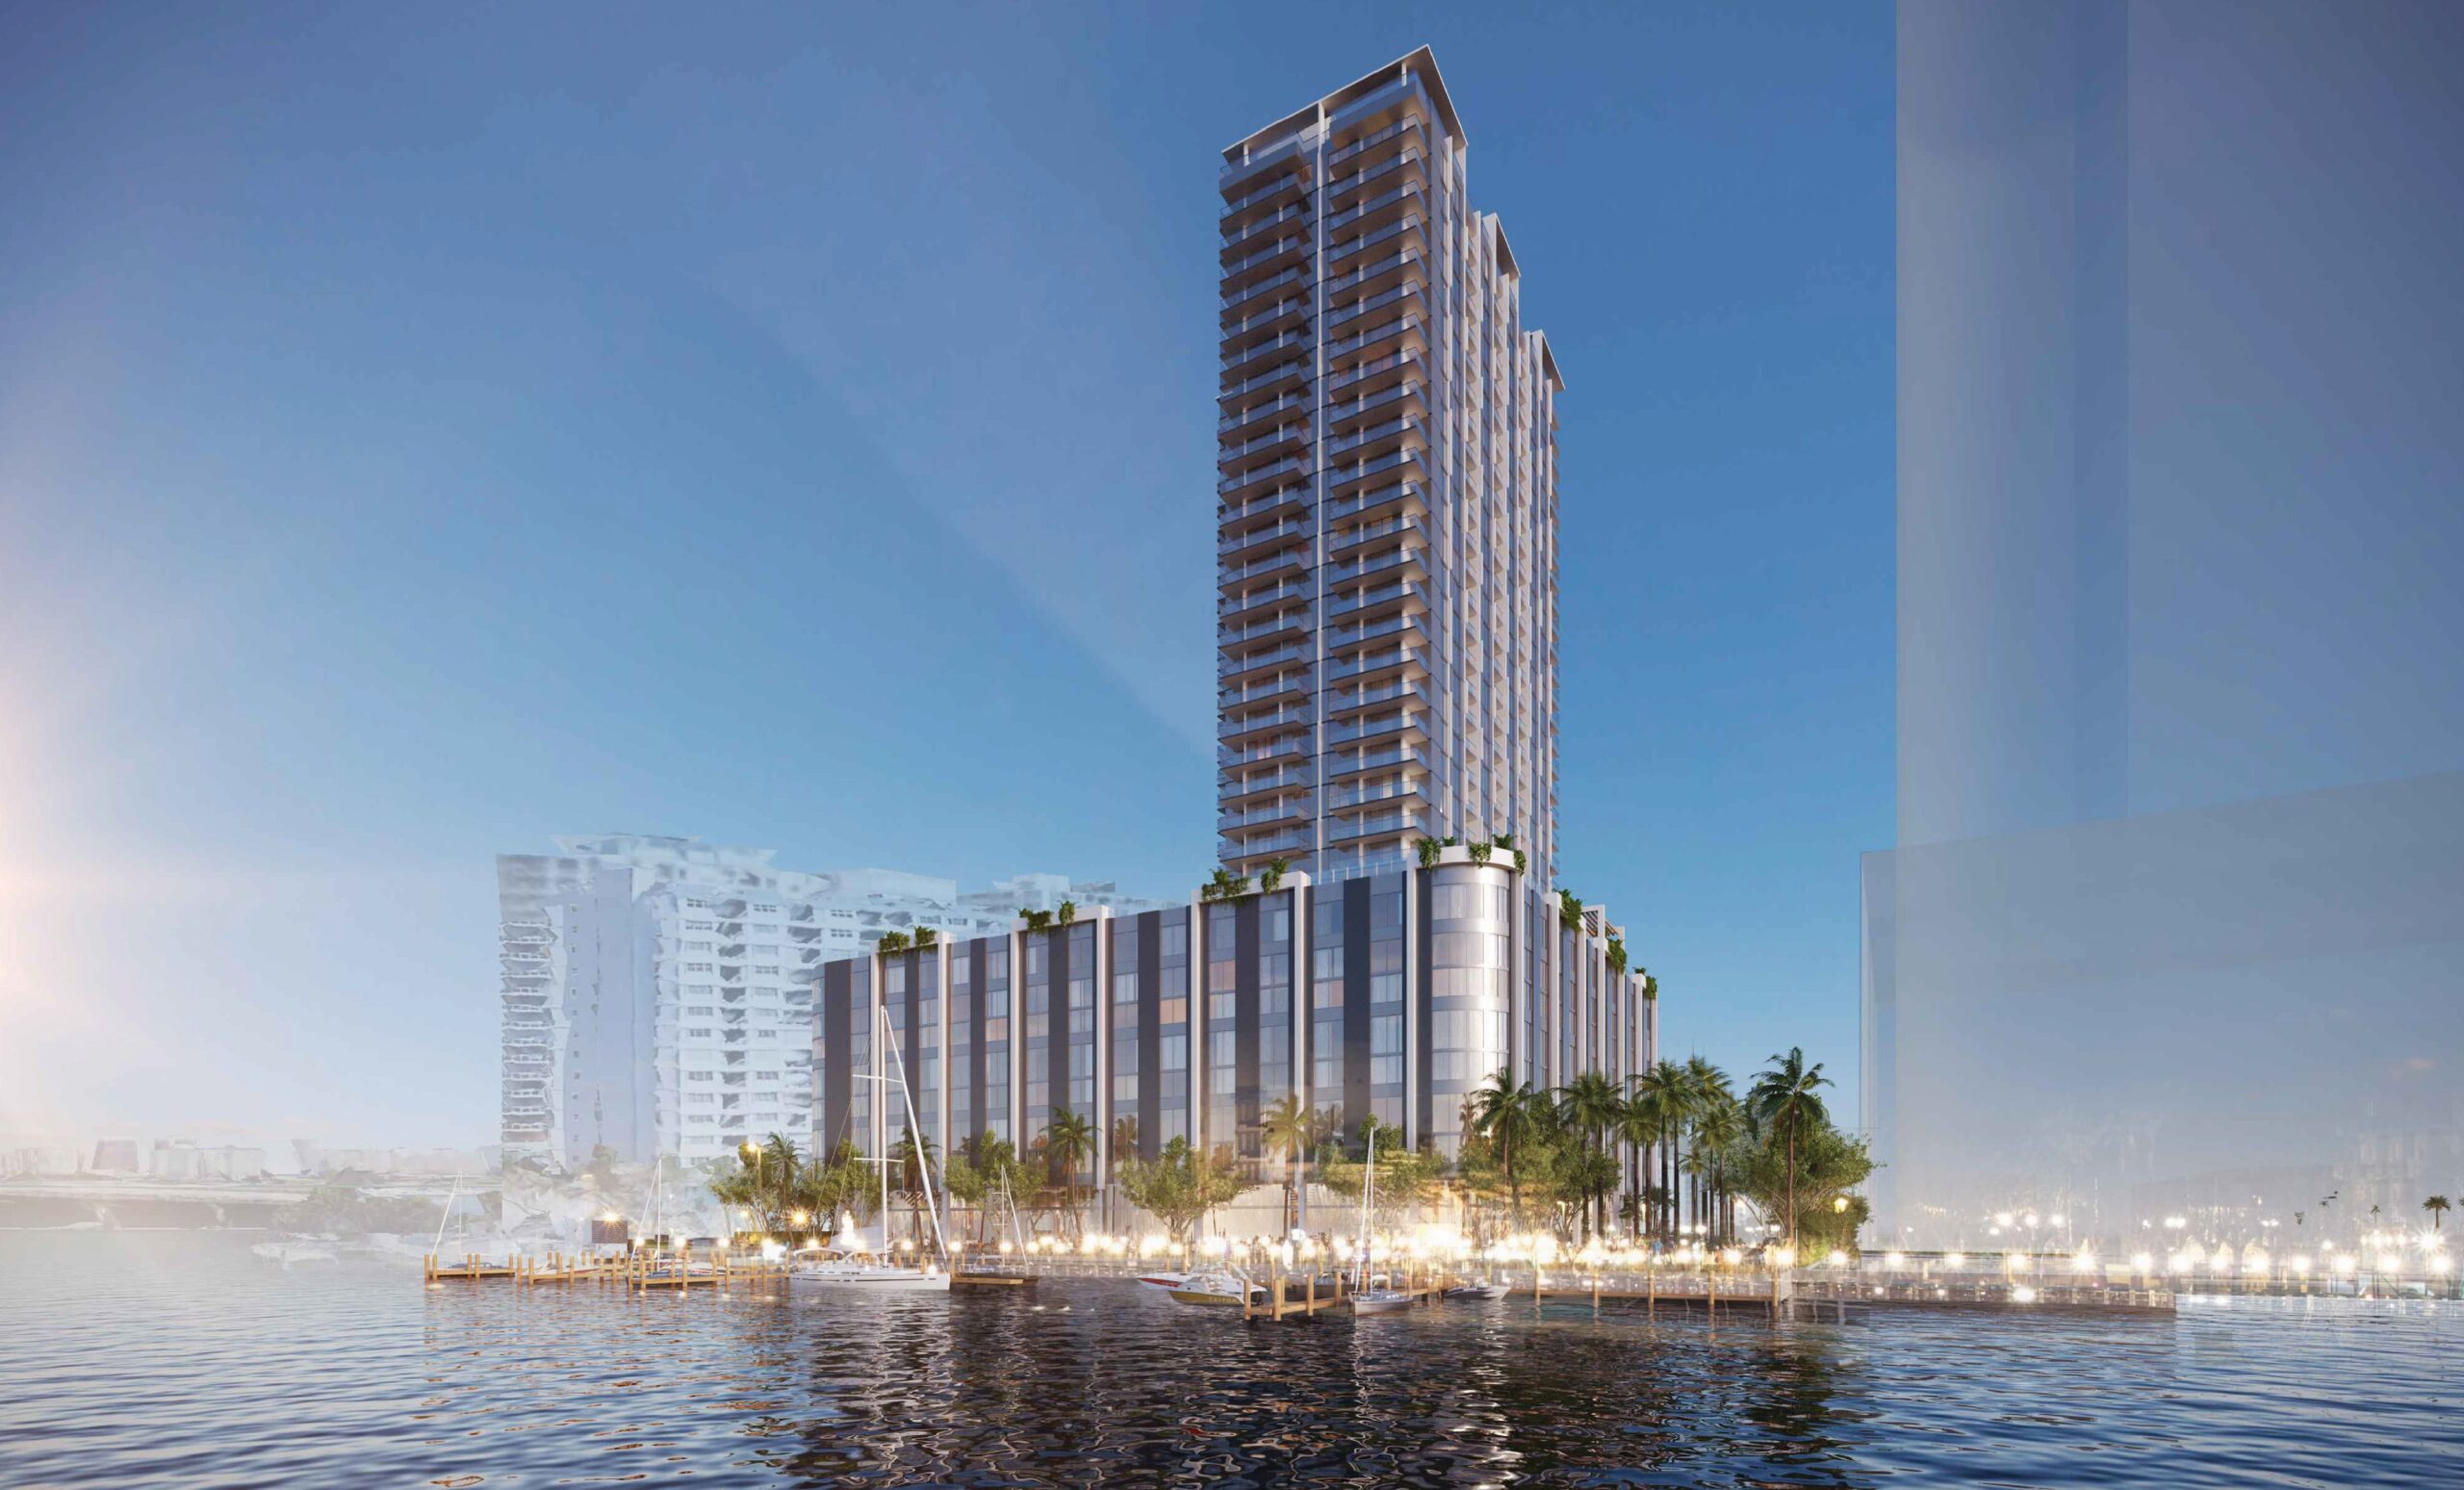 Jesta Group Receives Approval to Develop Shuckers Site in North Bay Village - SFBW